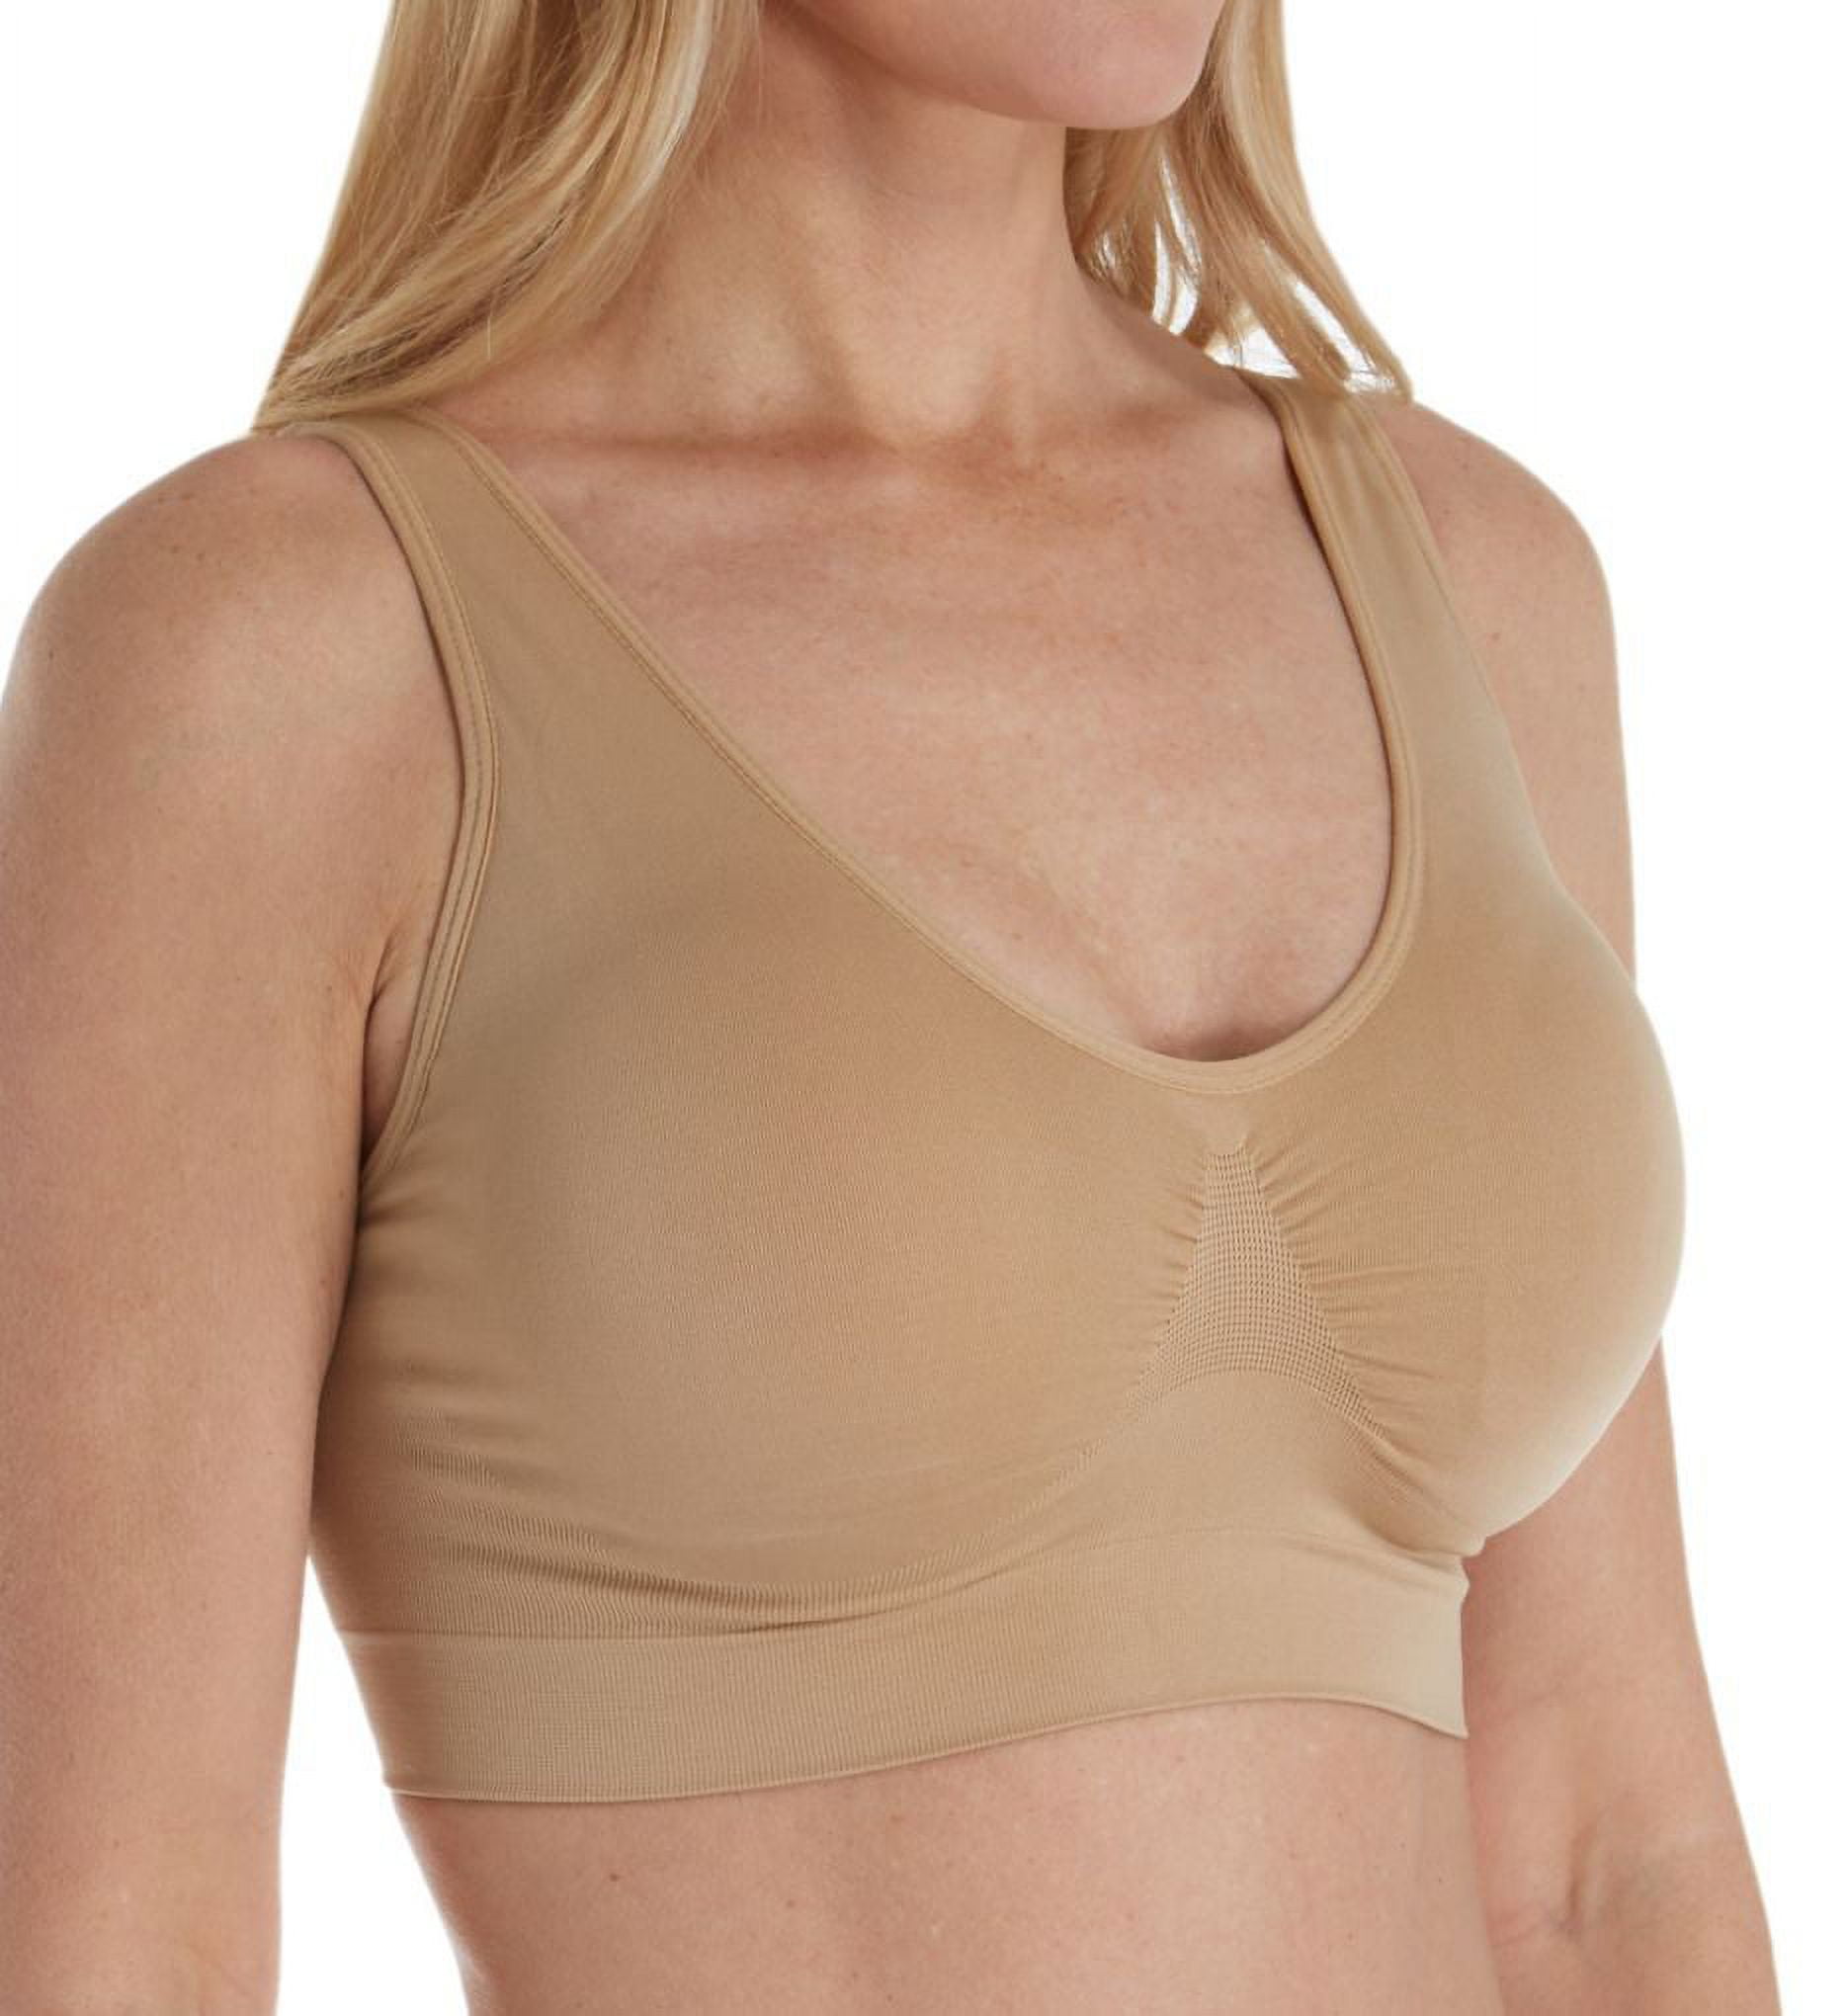 Women's Rhonda Shear 92071 Ahh Seamless Leisure Bra with Removable Pads  (Nude 4X)